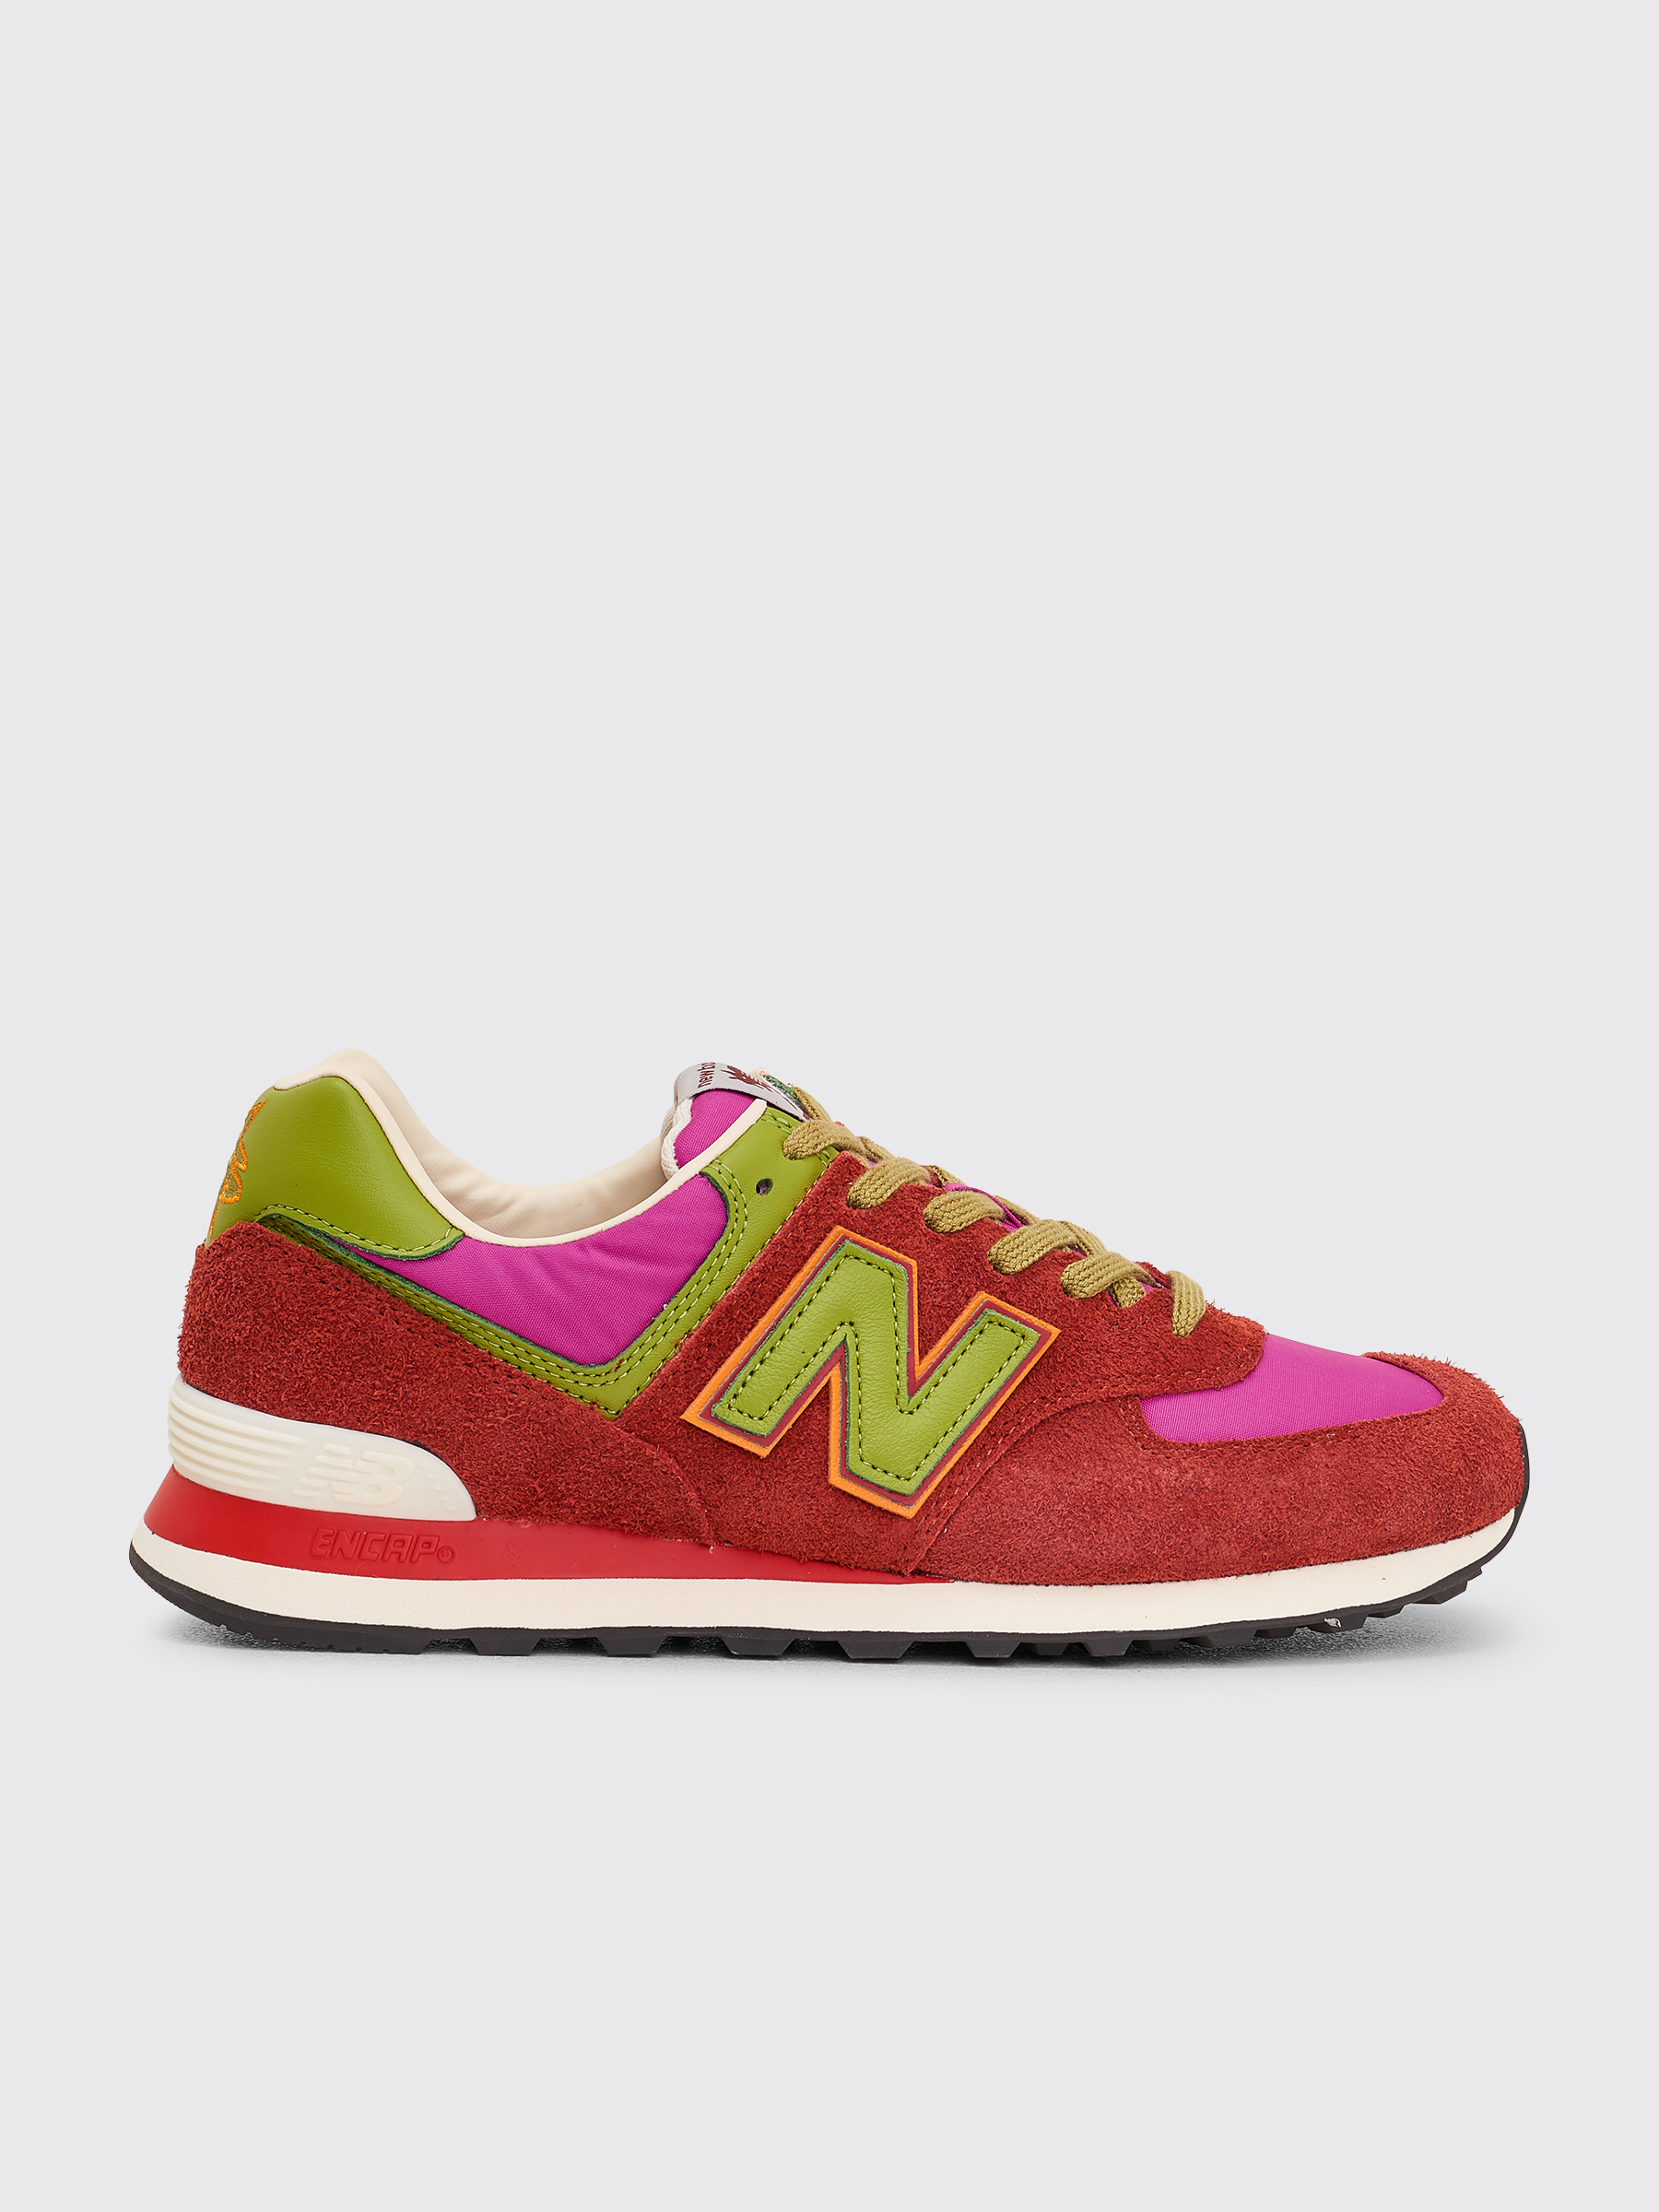 red leather new balance